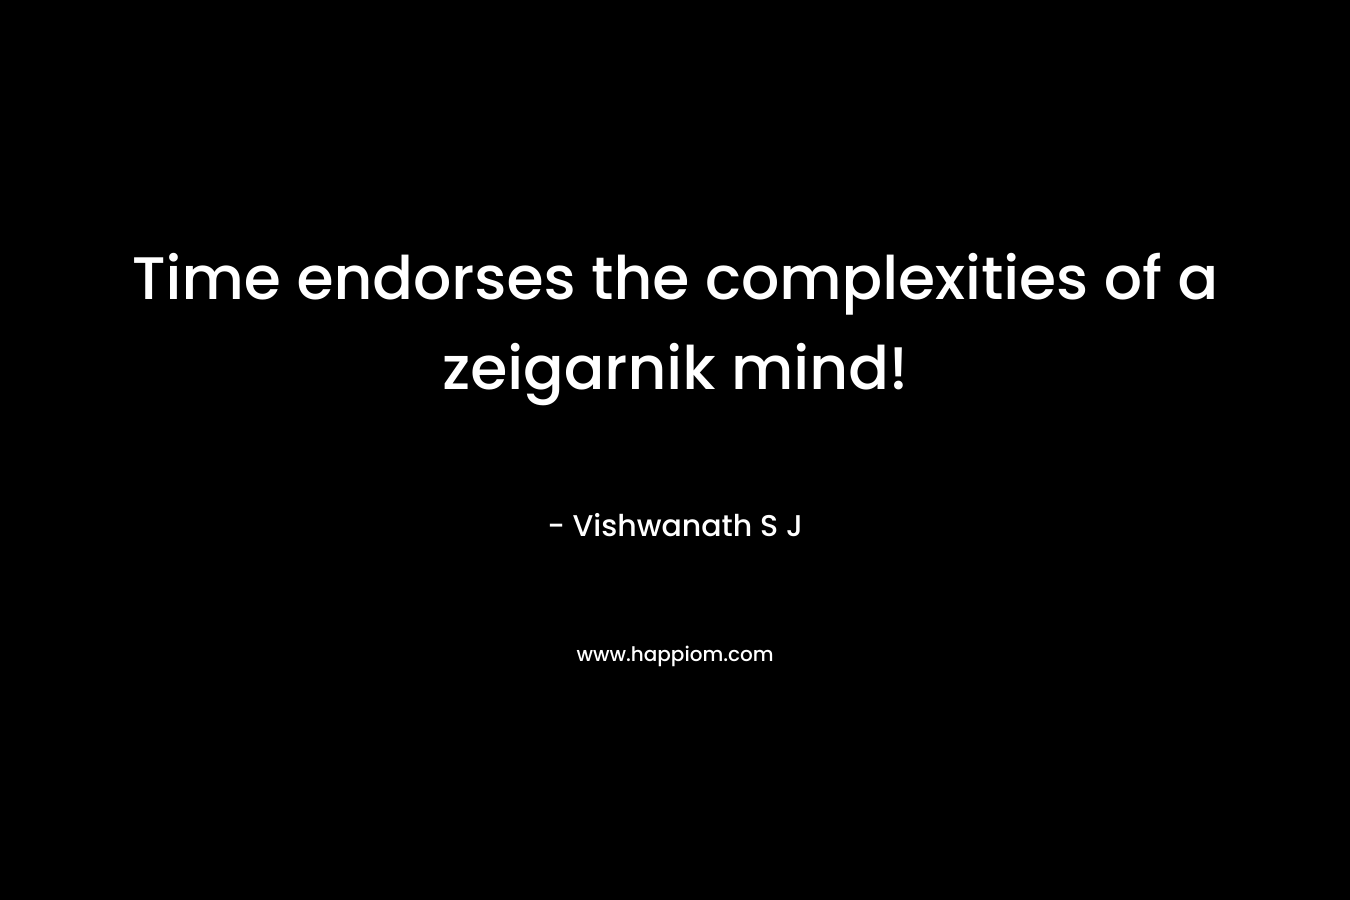 Time endorses the complexities of a zeigarnik mind!